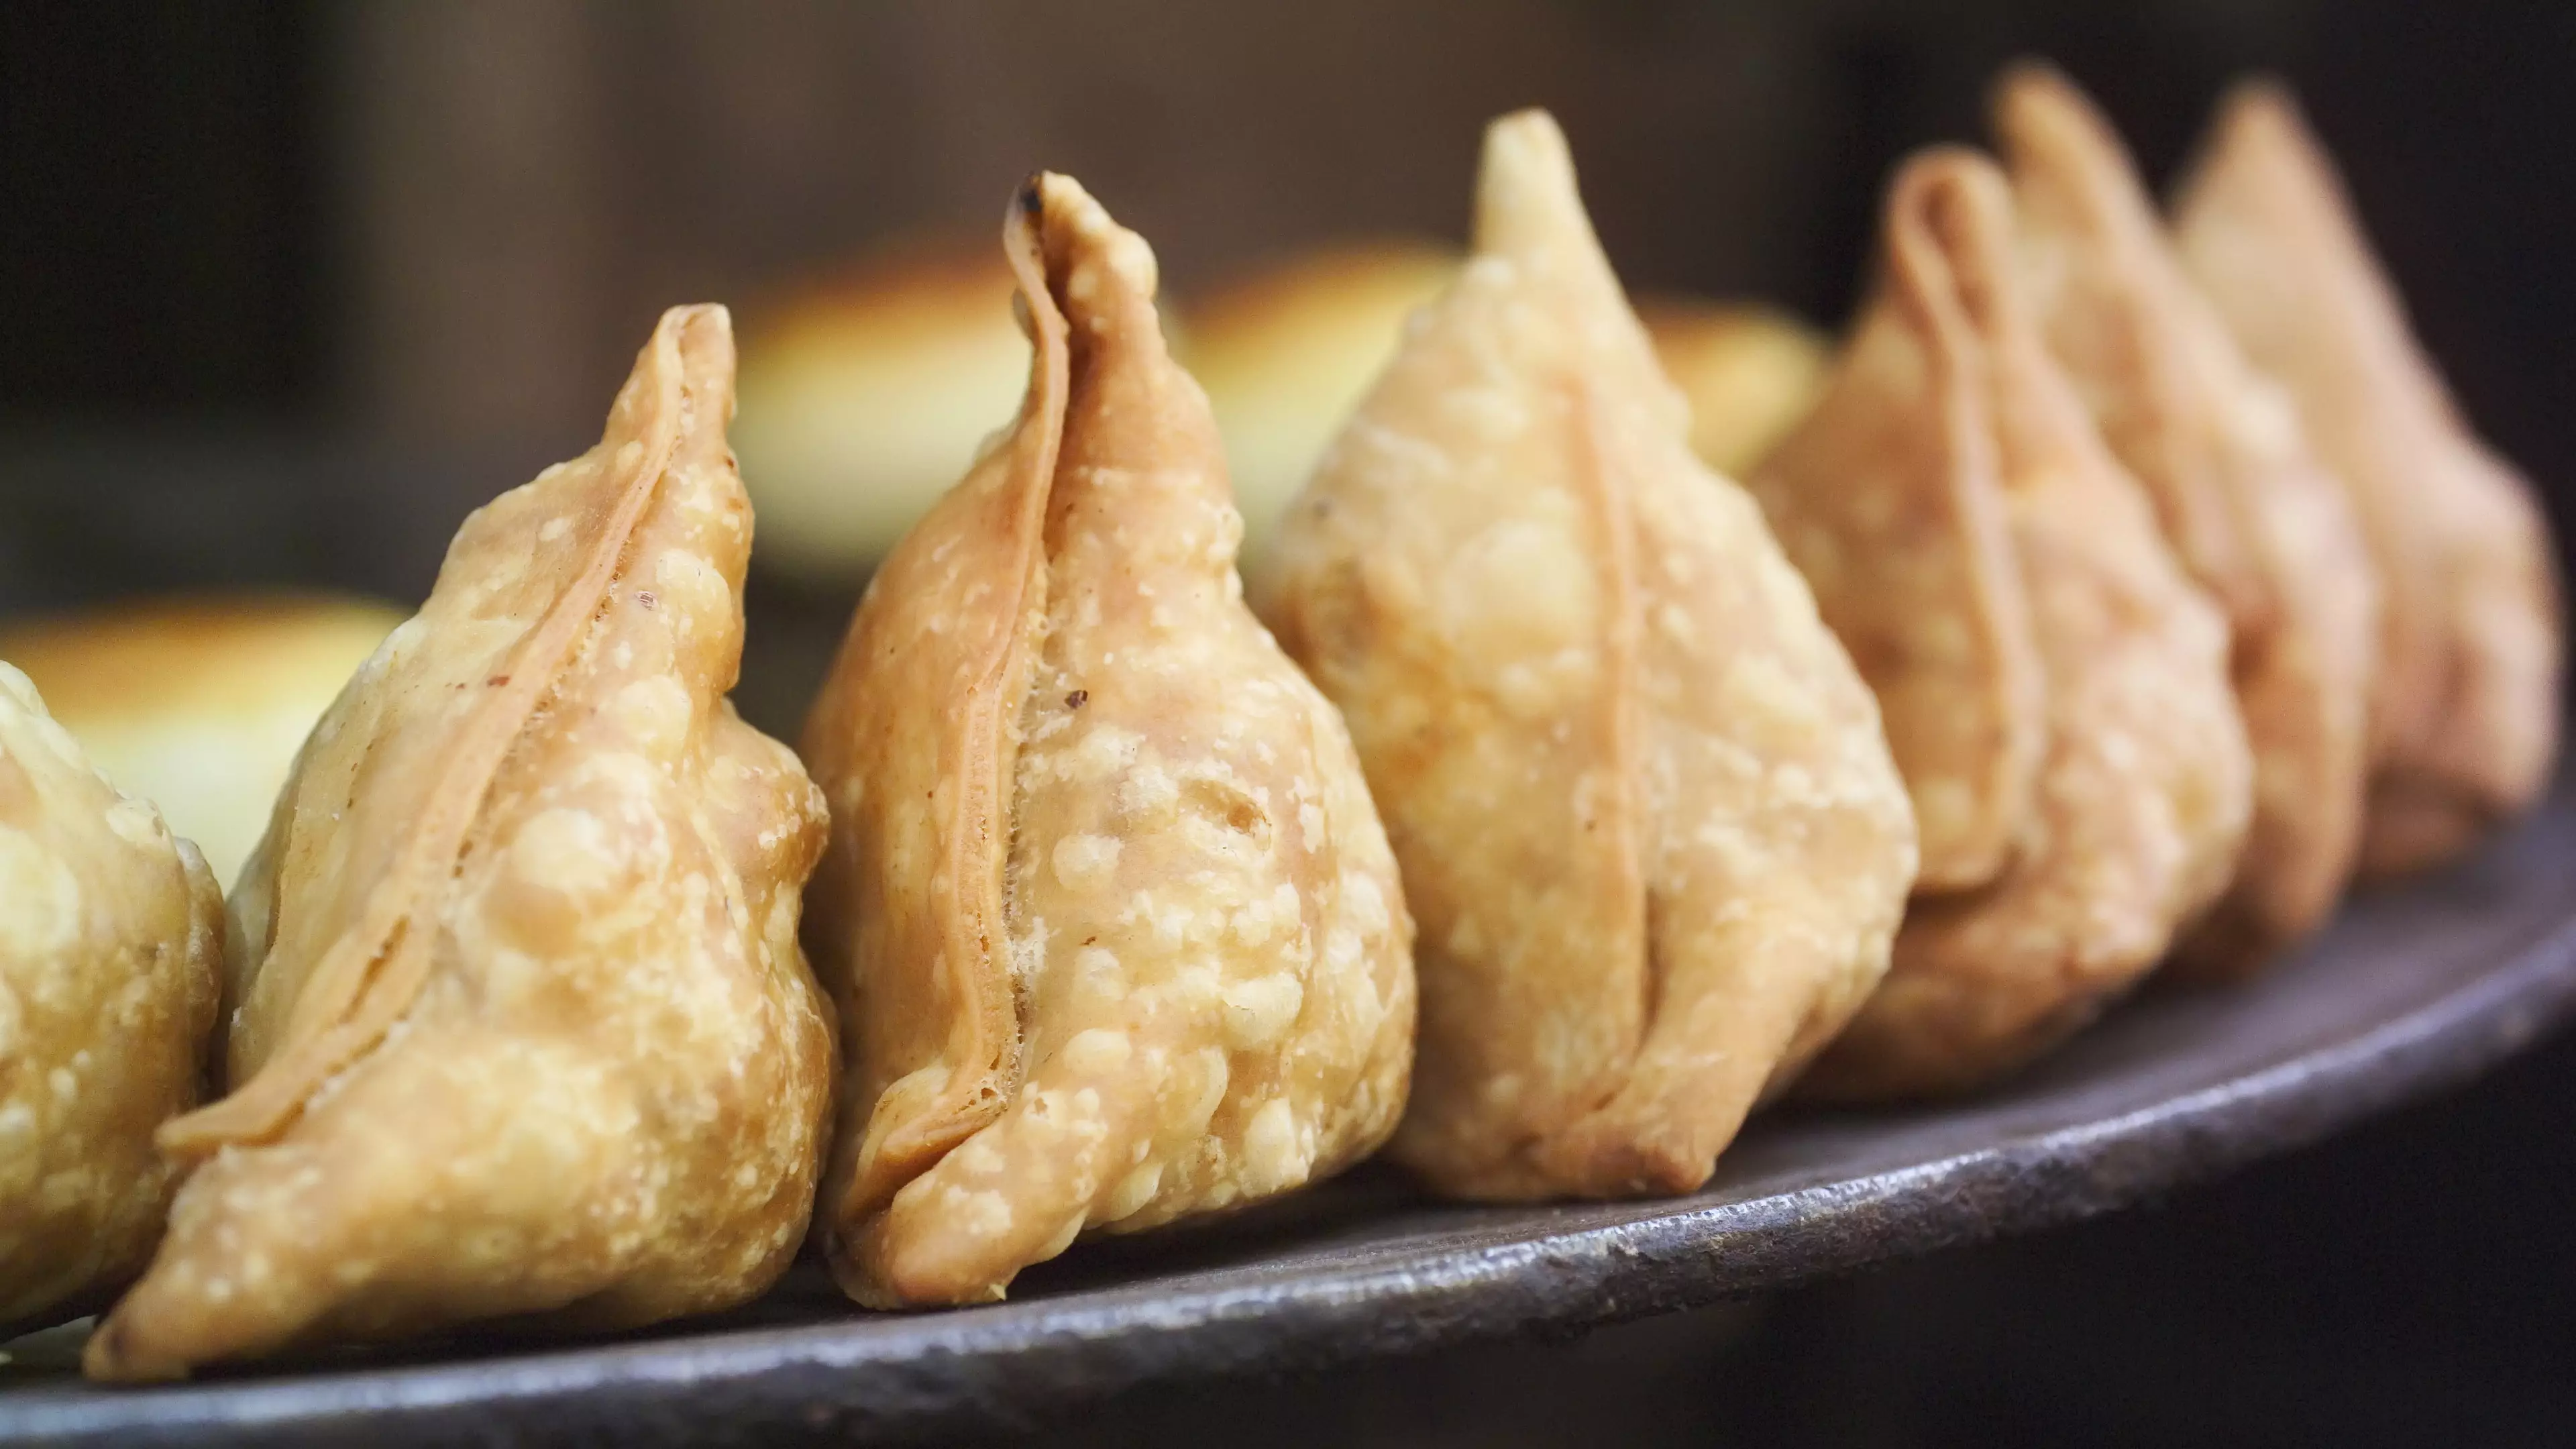 Man Shoves Samosa Up Bum To Smuggle Into Prison Cell